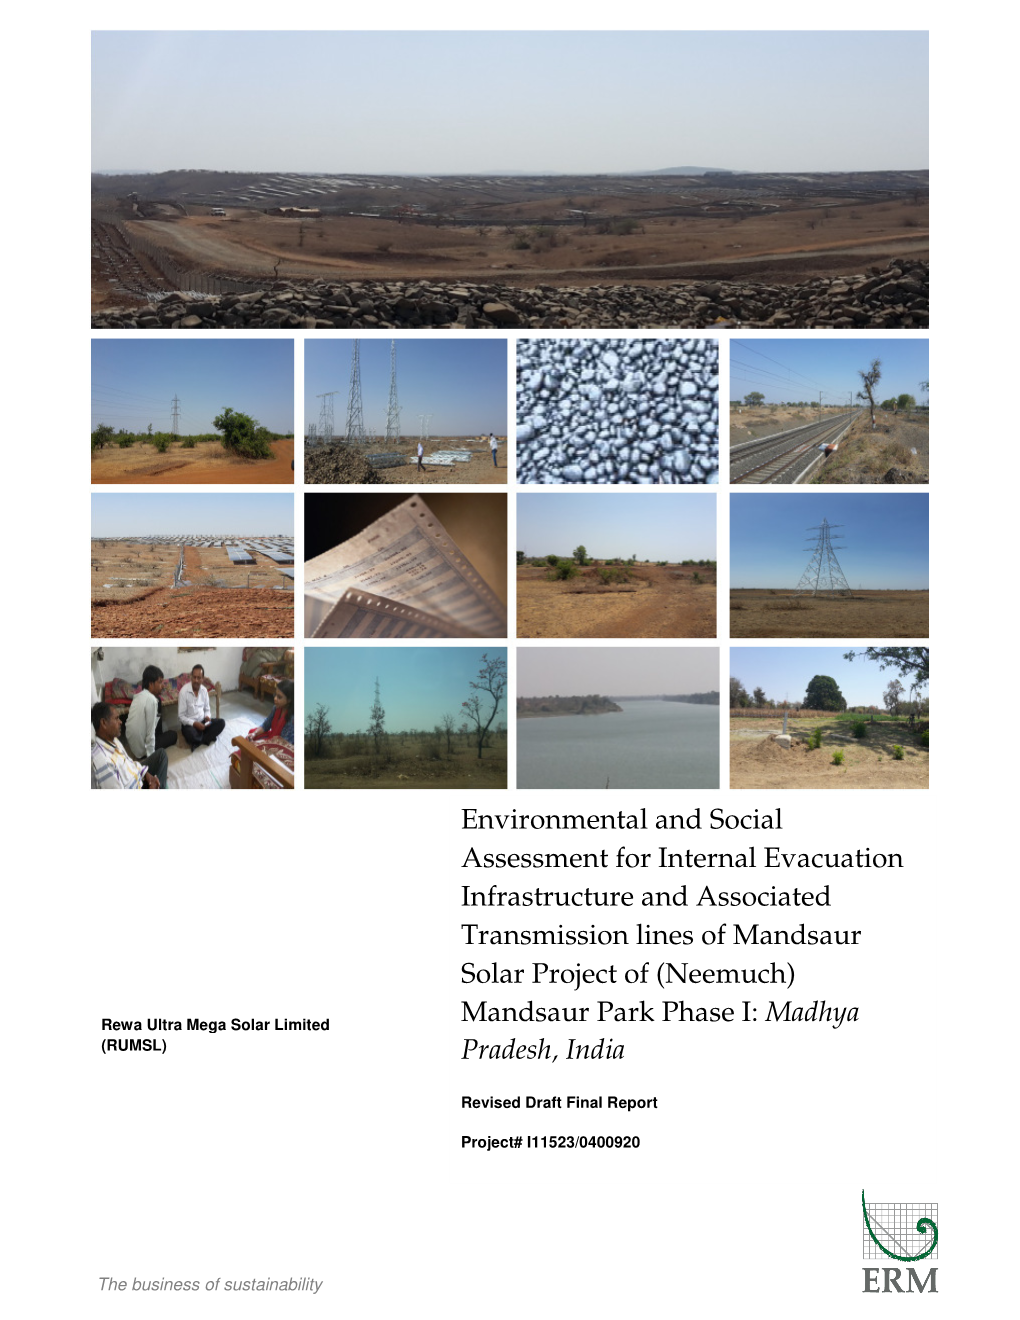 Environmental and Social Assessment for Internal Evacuation Infrastructure and Associated Transmission Lines of Neemuch-Mandsaur Solar